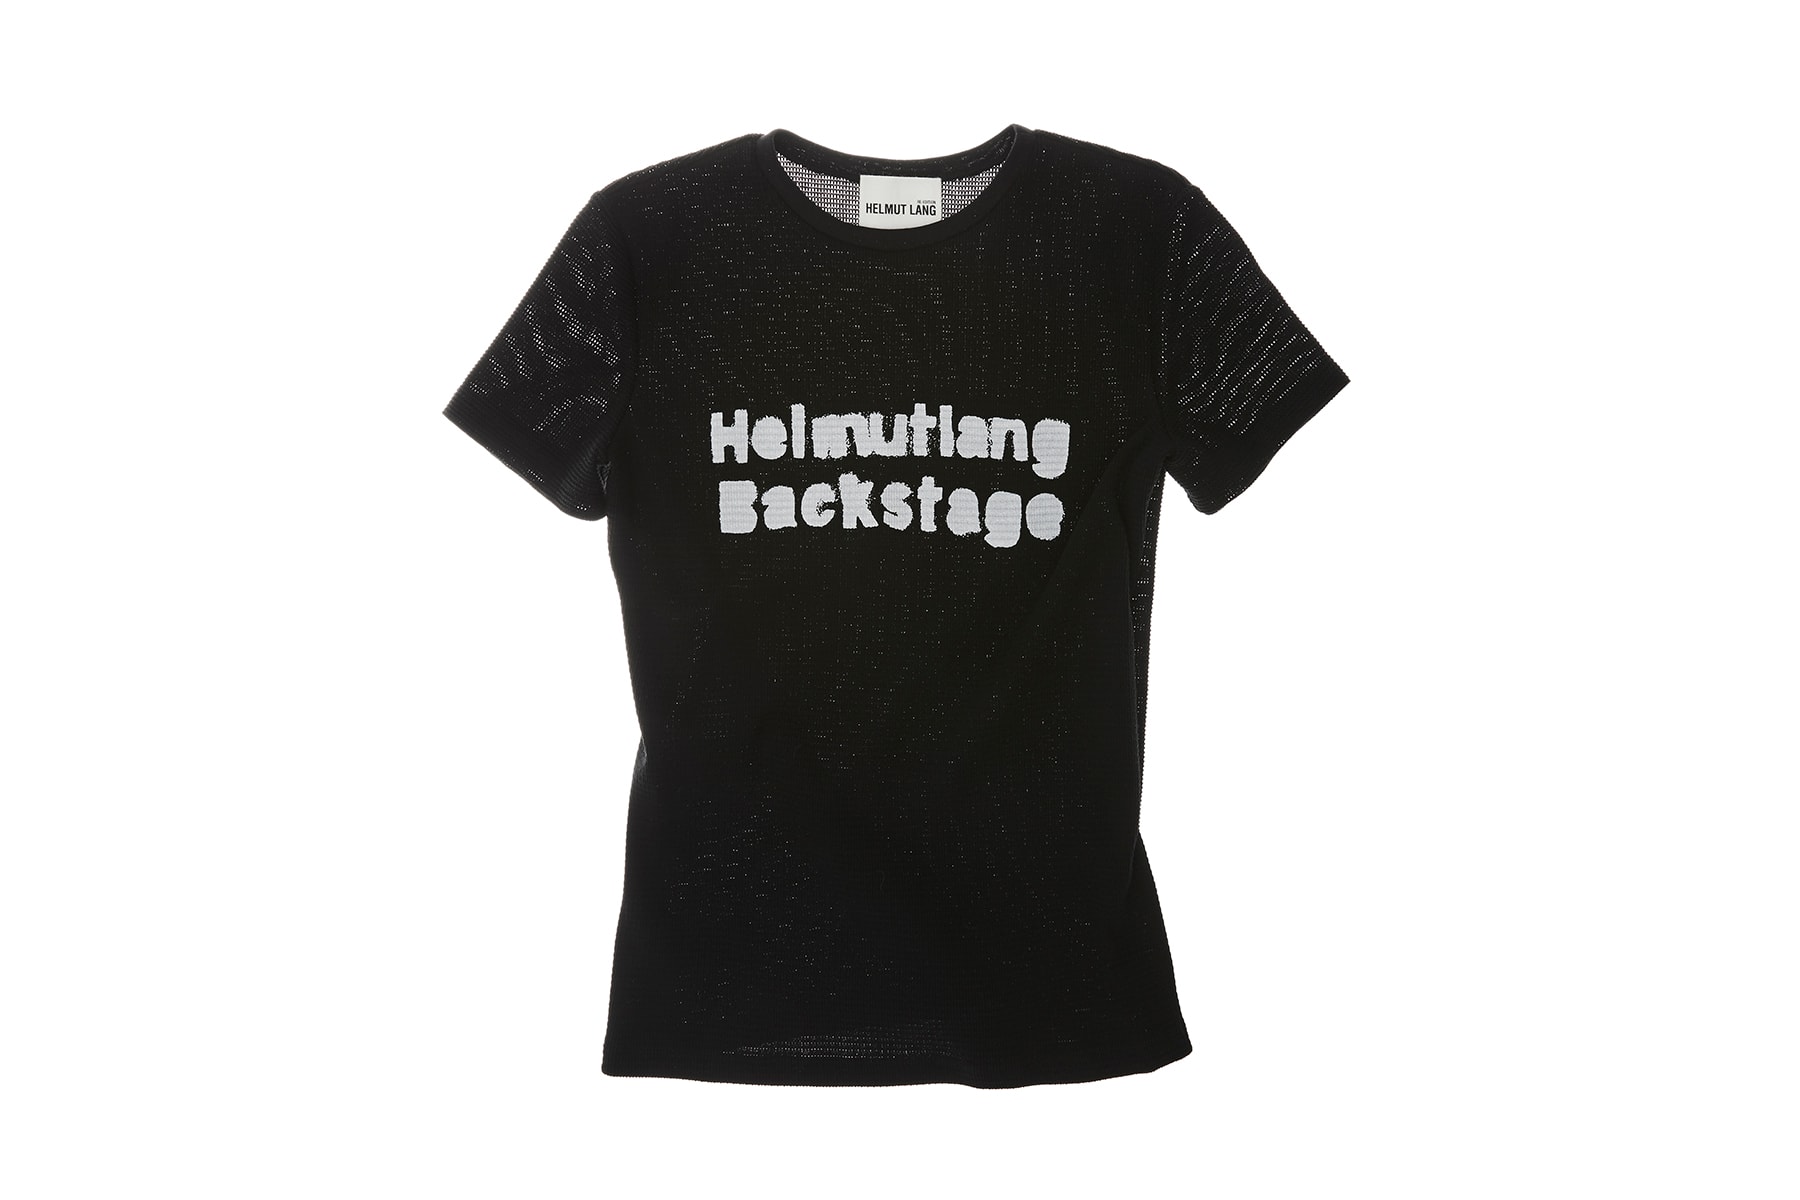 helmut lang re edition byronesque collection backstage print tee shirt black white 1994